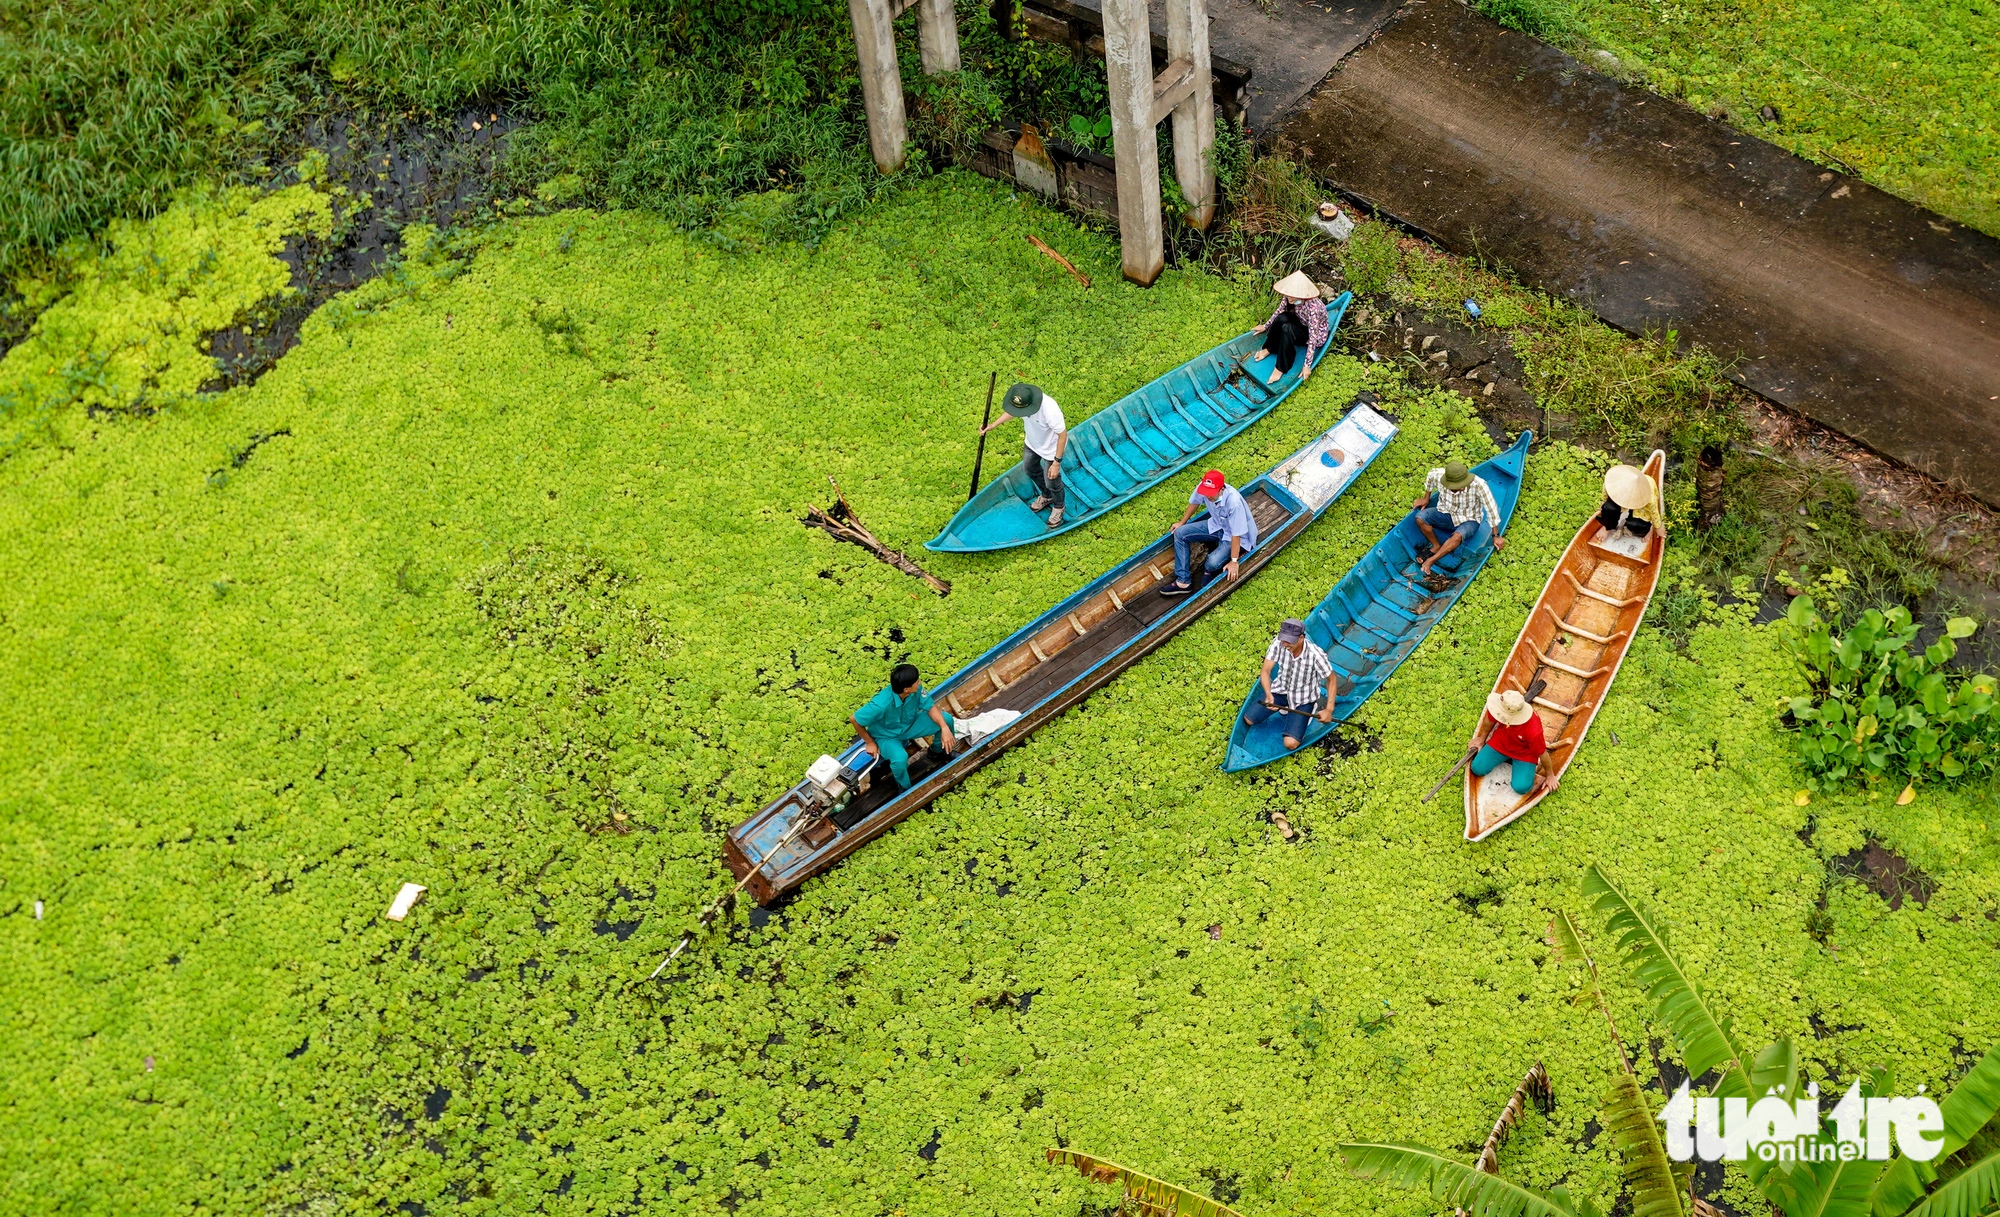 Visitors can rent boats to go deep into the forest in the U Minh Ha National Park, located in Ca Mau Province, southern Vietnam. Photo: Thanh Huyen / Tuoi Tre